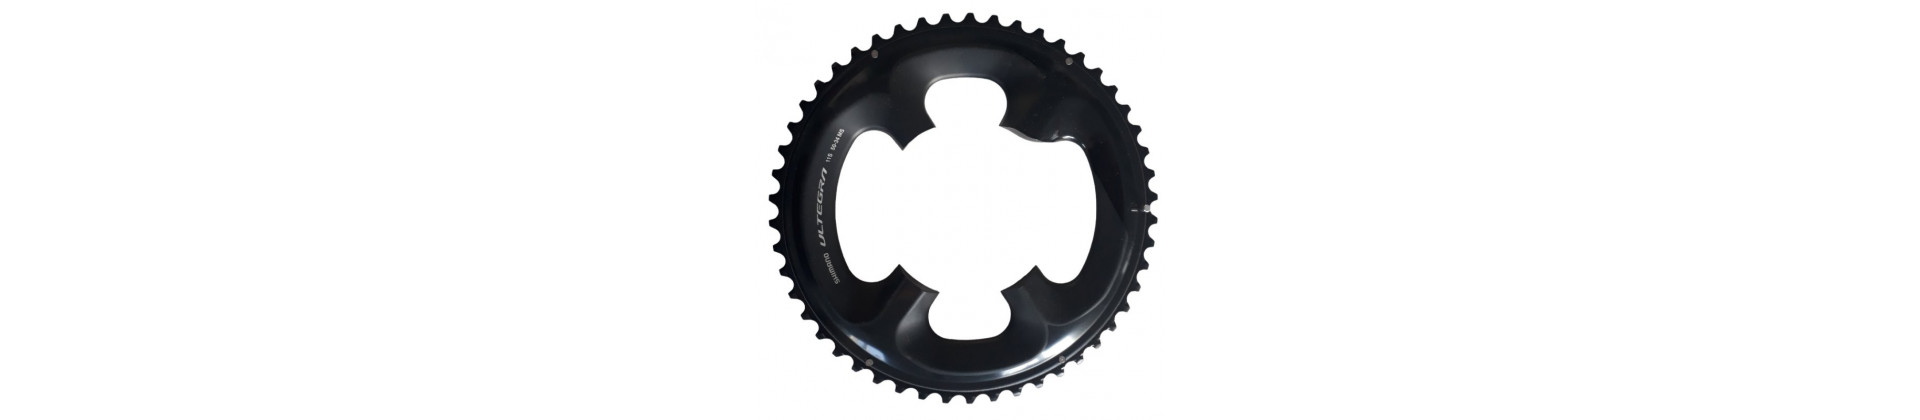 Chainring for road bike